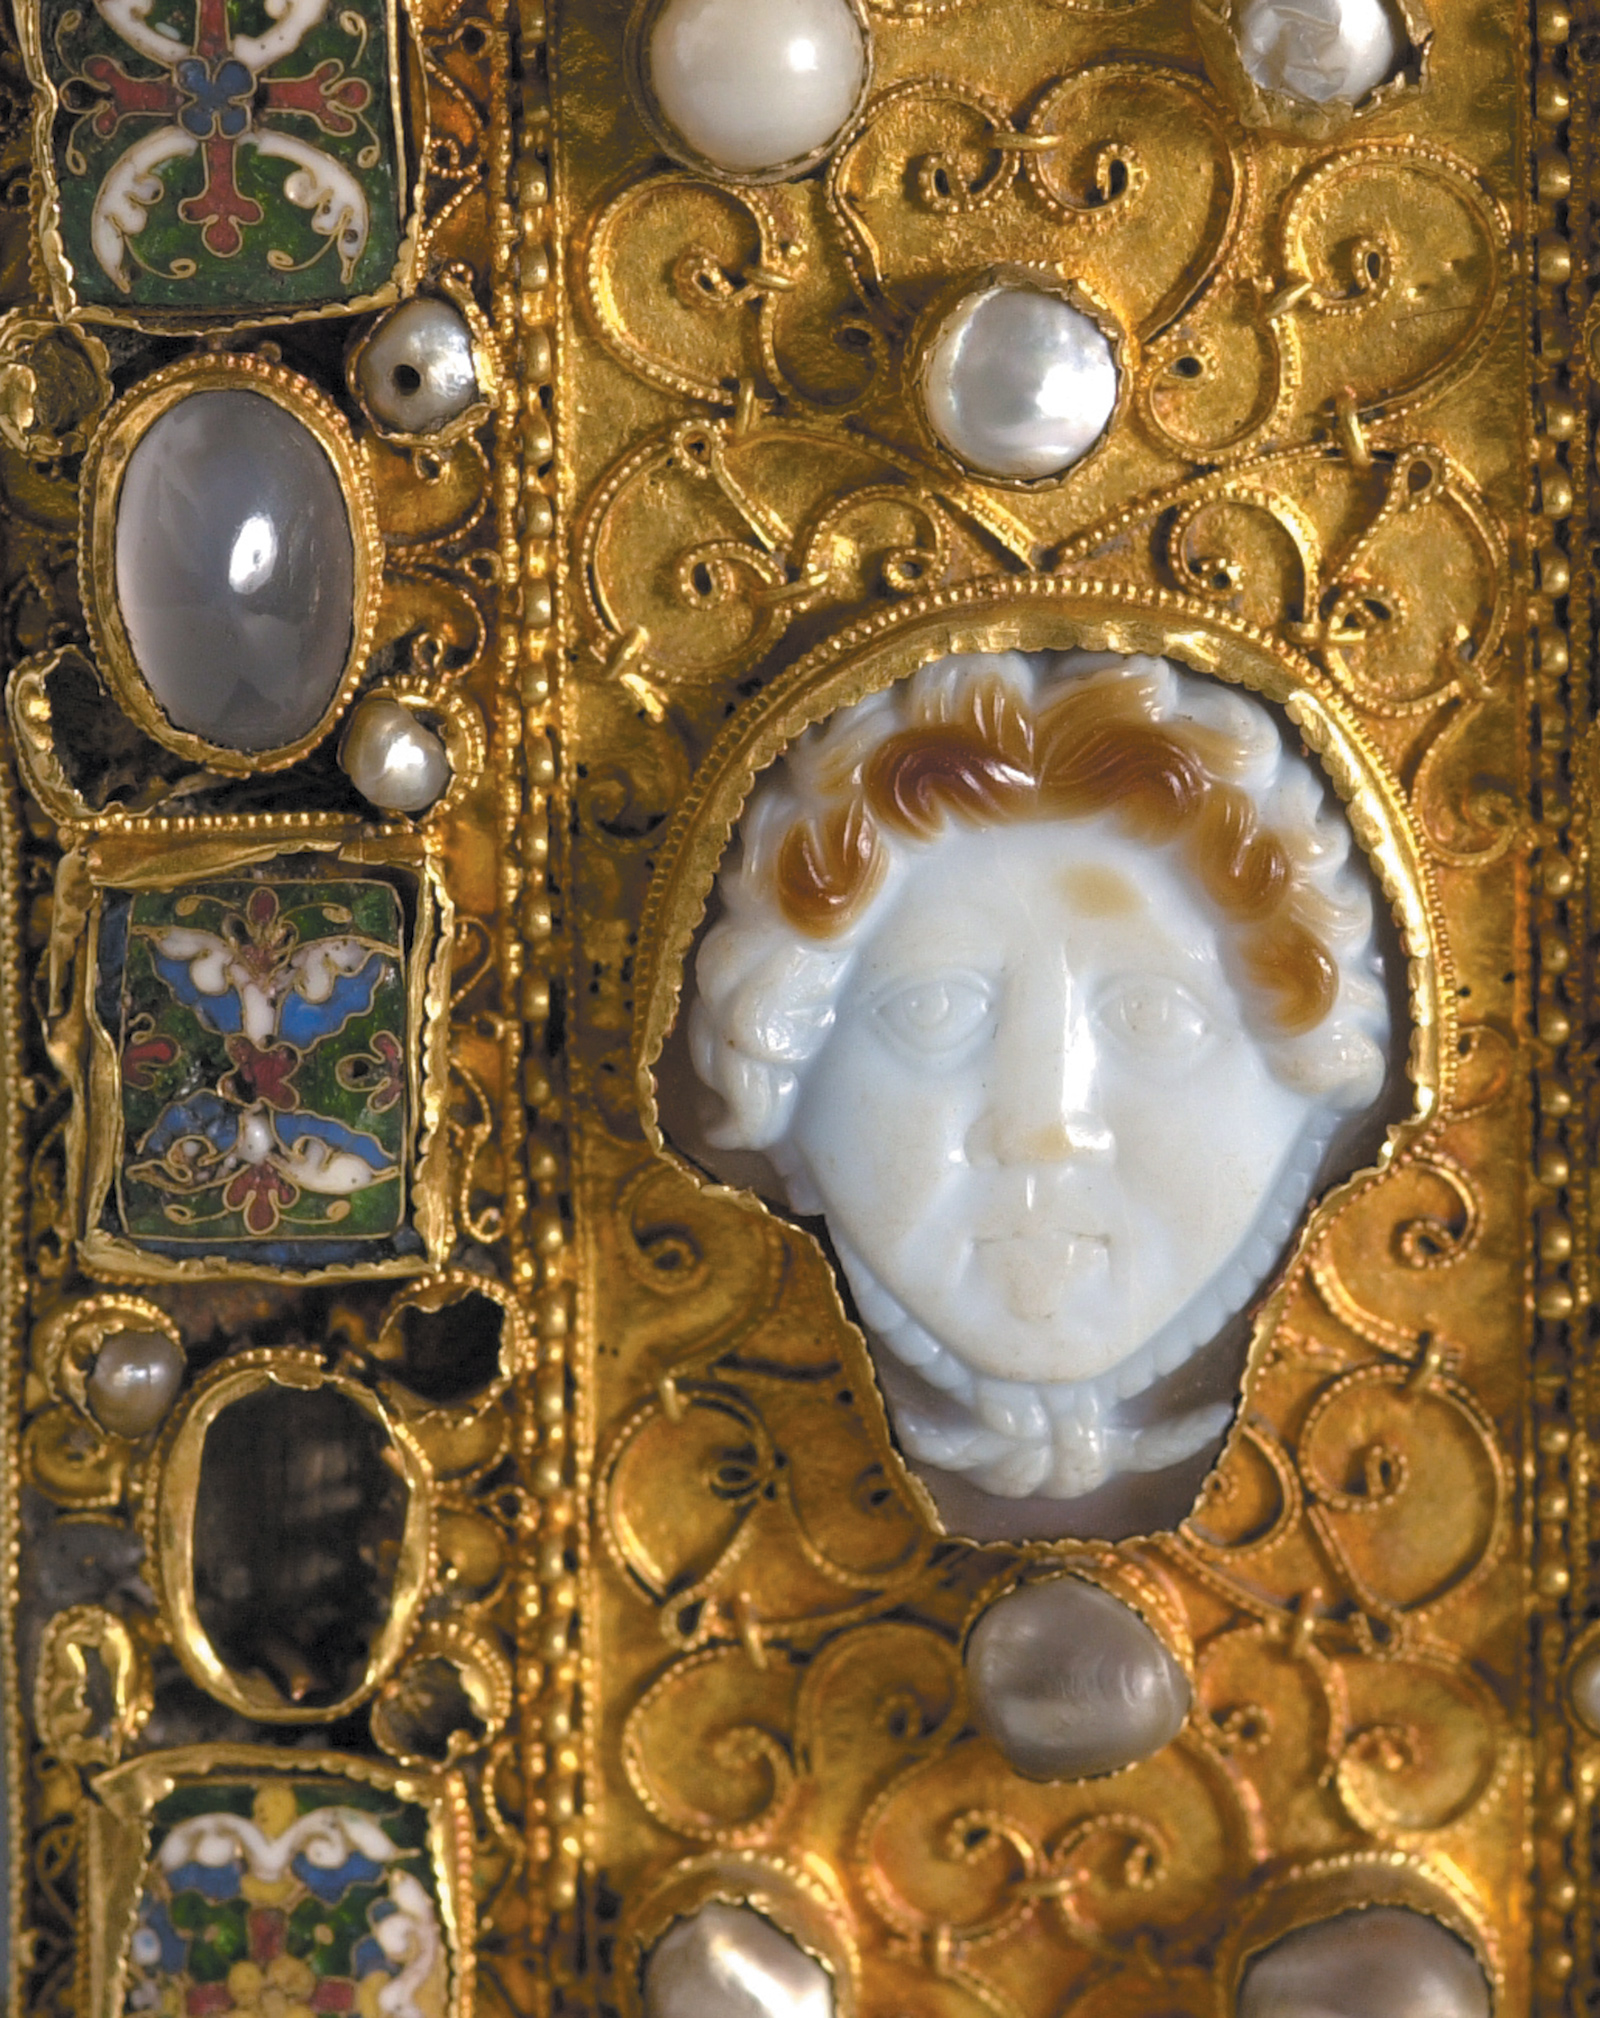 An onyx head of Medusa from a jeweled cross, circa 900–1050, from the Essen Cathedral Treasury